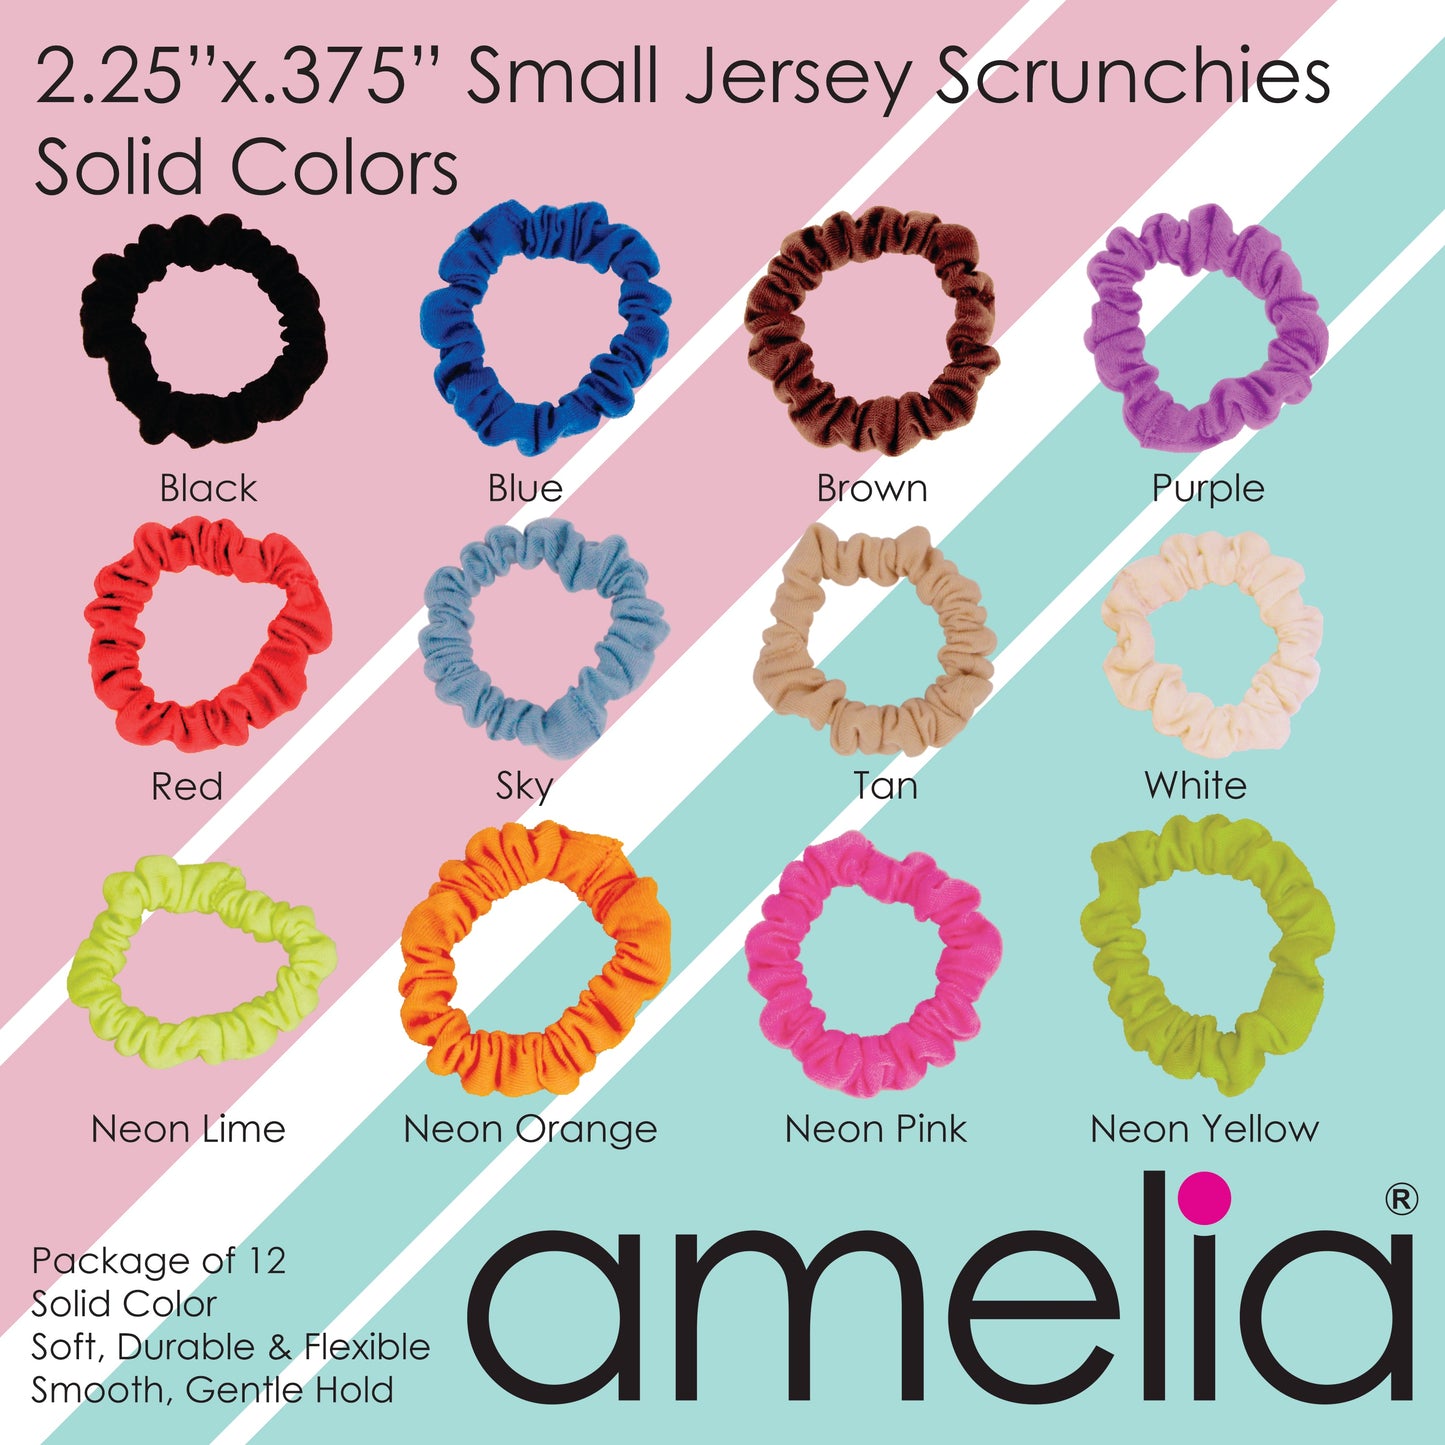 Amelia Beauty, Sky Jersey Scrunchies, 2.25in Diameter, Gentle on Hair, Strong Hold, No Snag, No Dents or Creases. 12 Pack